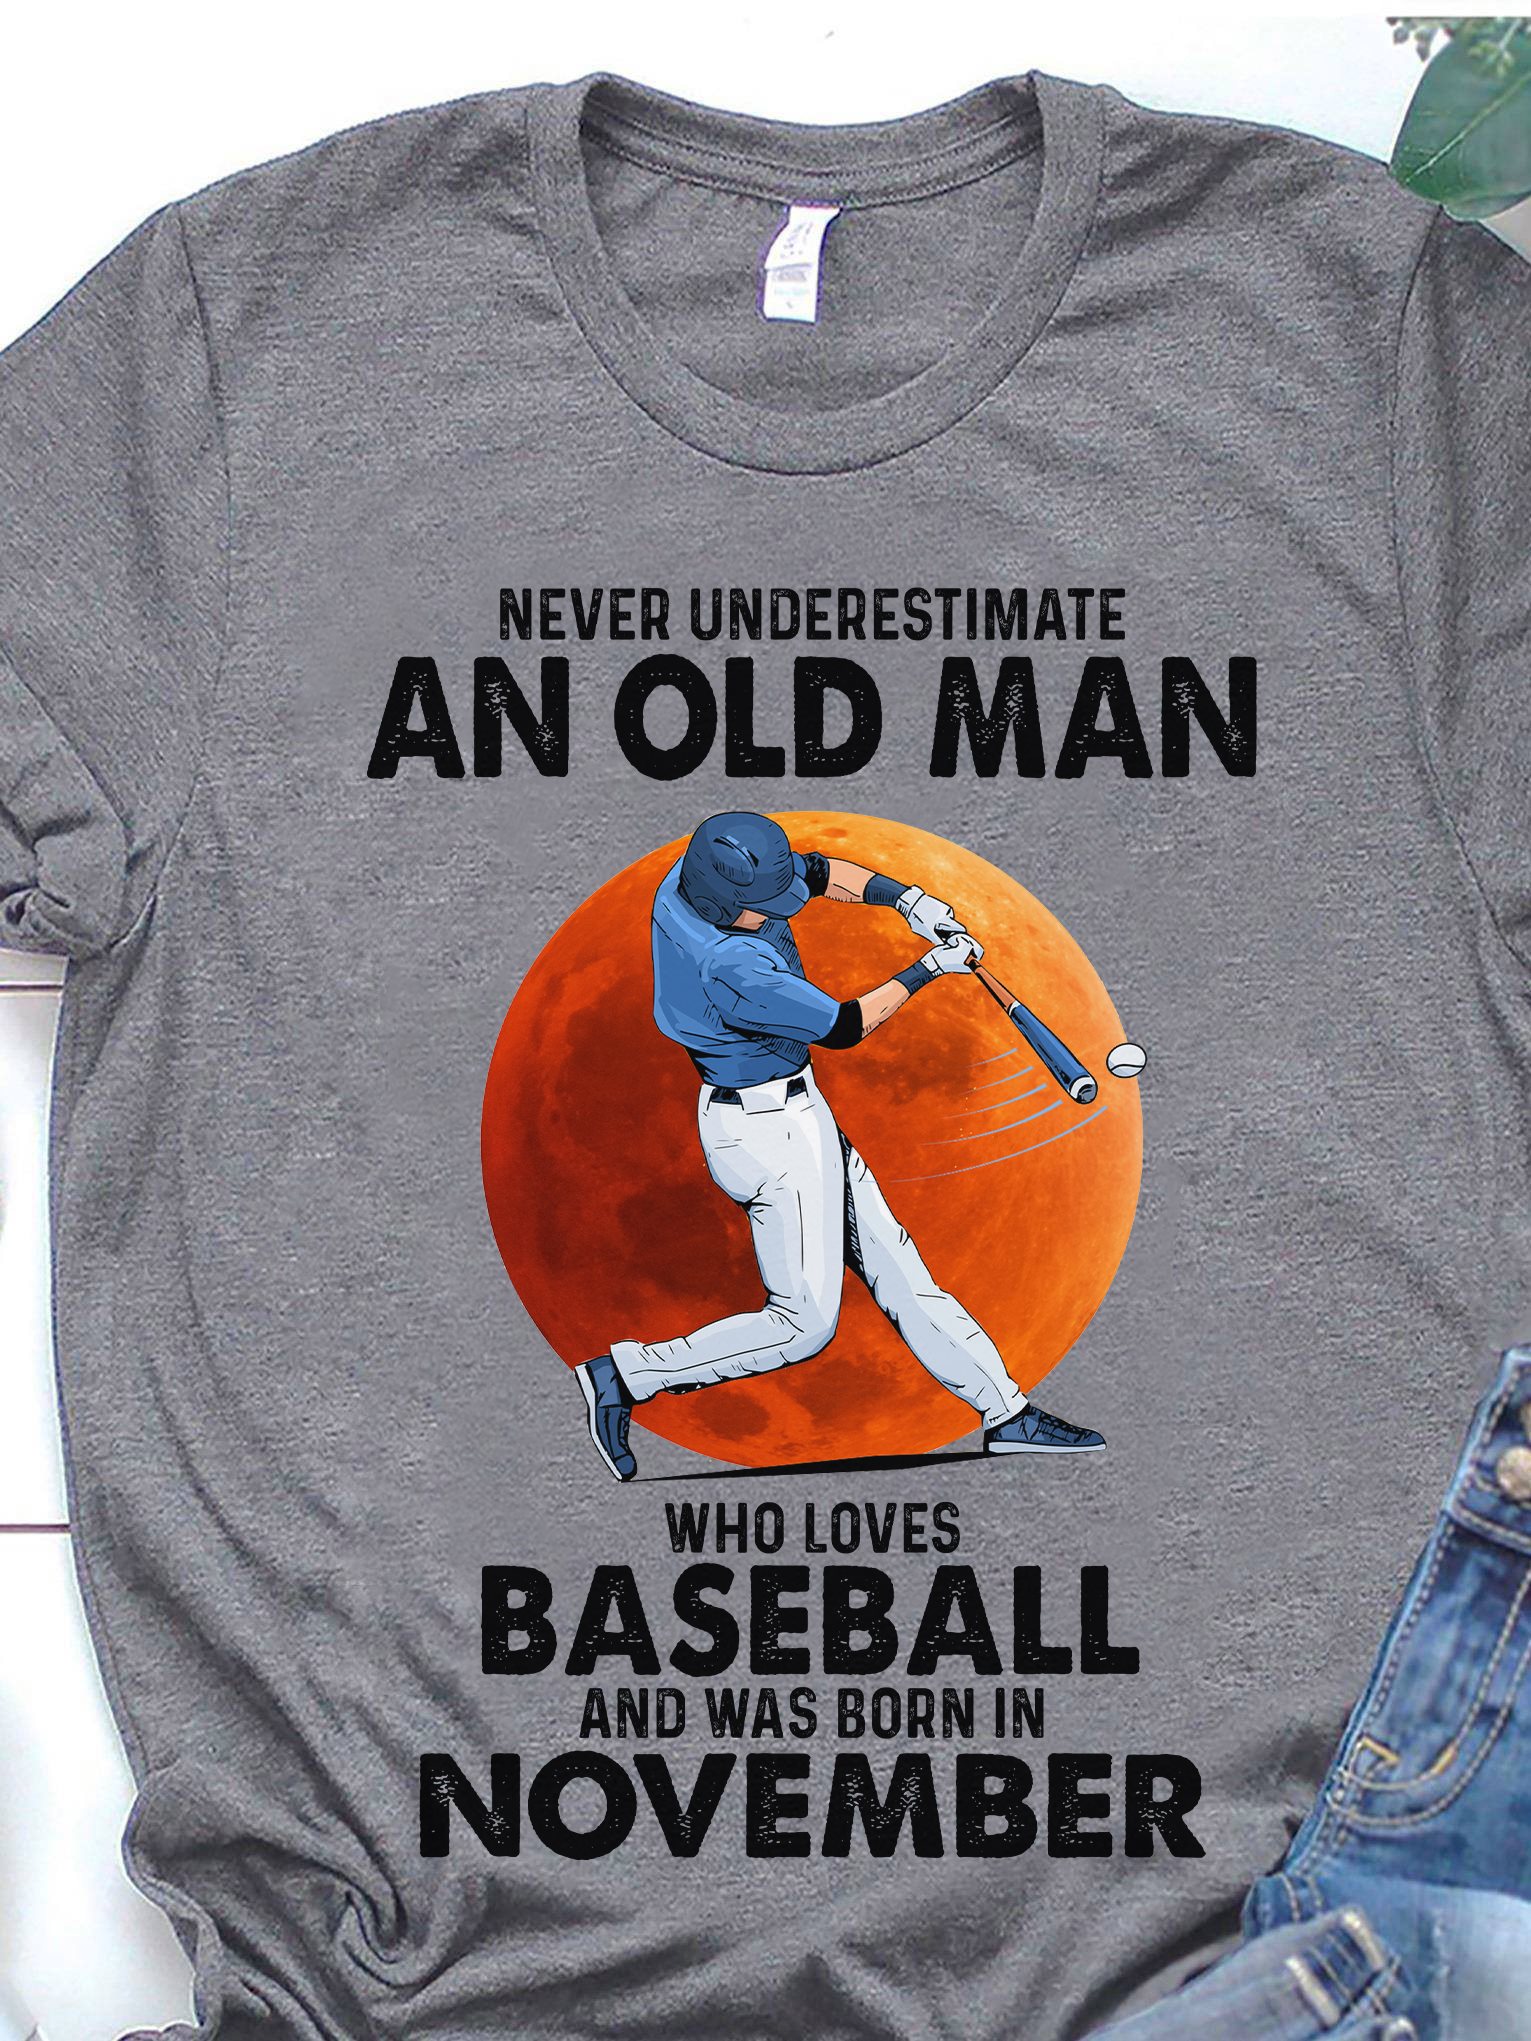 Never underestimate an old man who loves baseball and was born in November